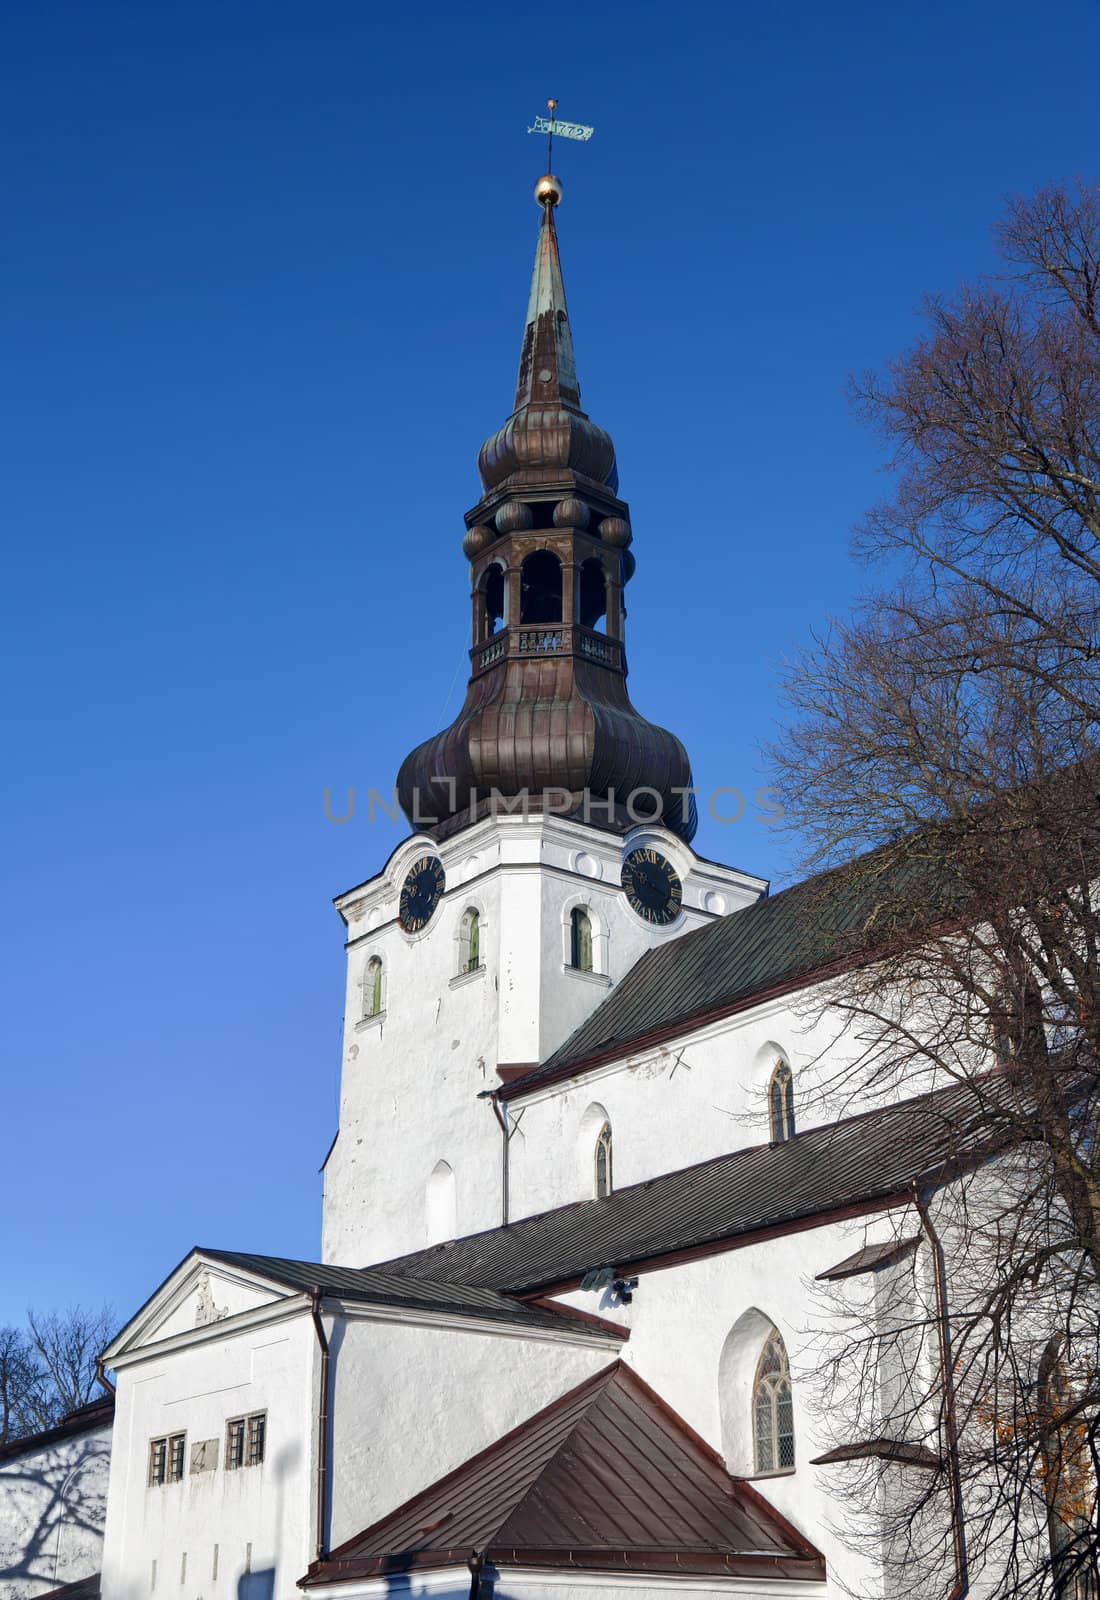 Dome Church in Estonia in Tallinn with a close up of the bronze spire and bell tower